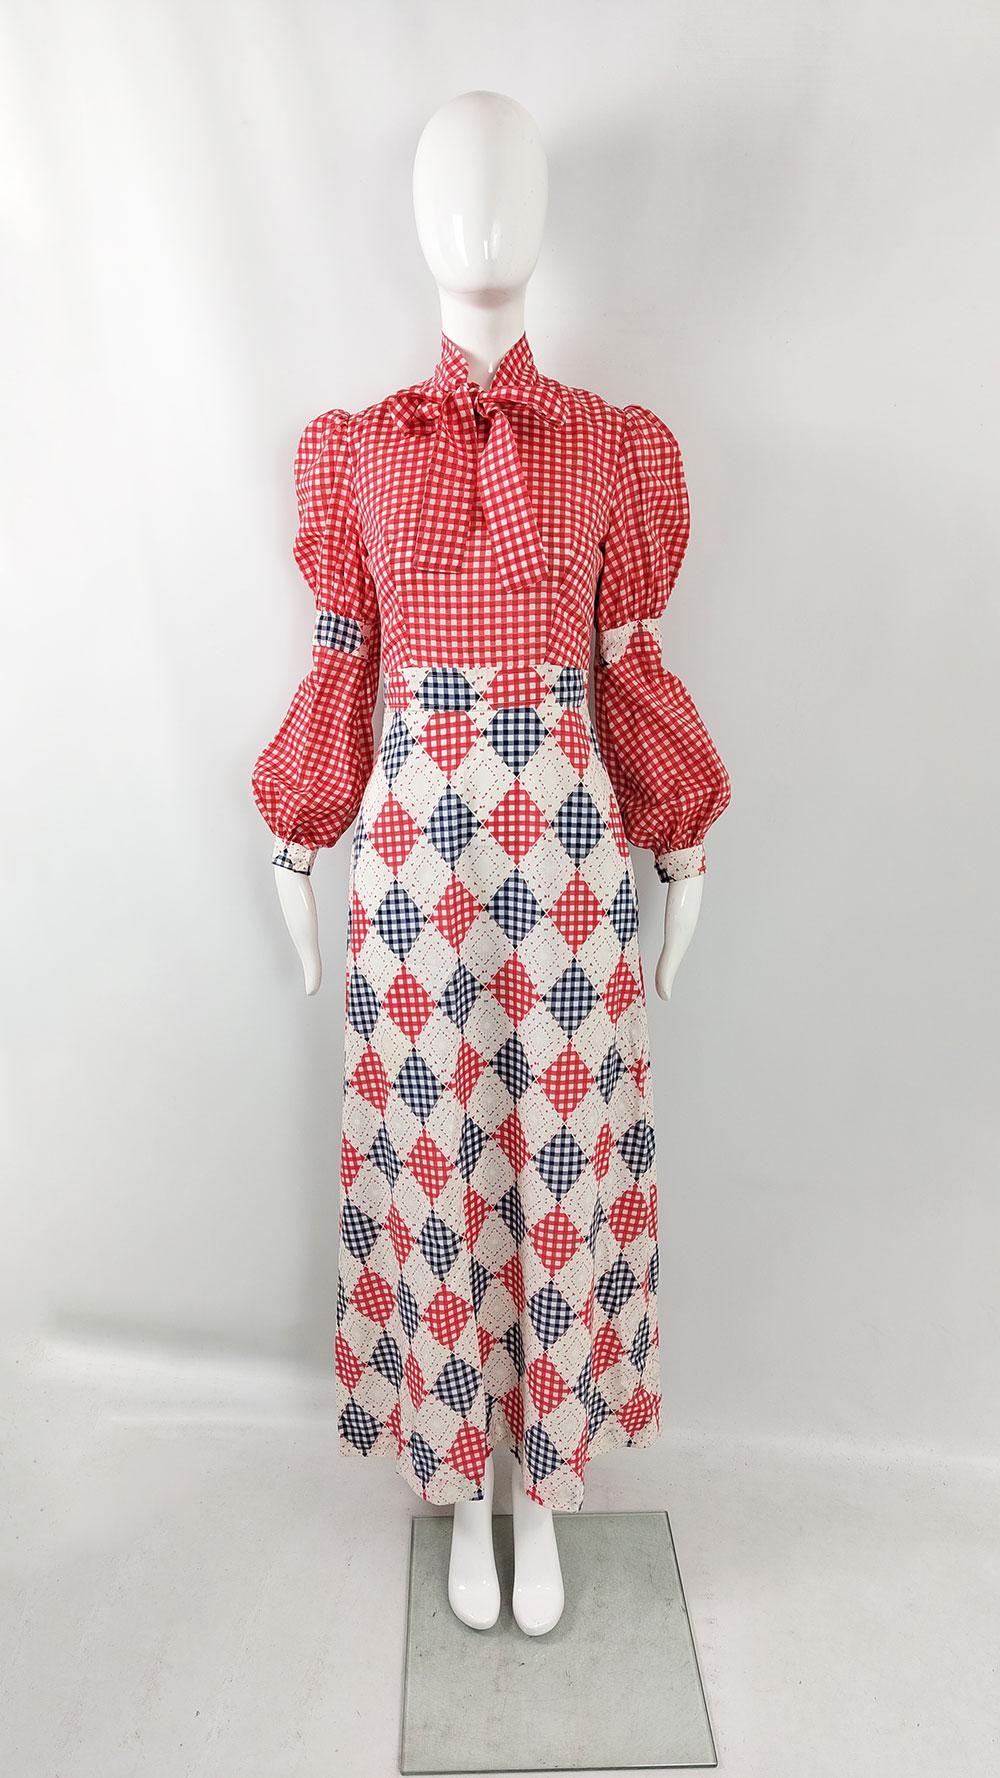 A stunning vintage women's maxi dress from the 1970s by the British boutique label St Andre. The top showcases a red and white gingham check fabric, while the skirt features a diamond print. The standout feature is the marvelous bishop-style